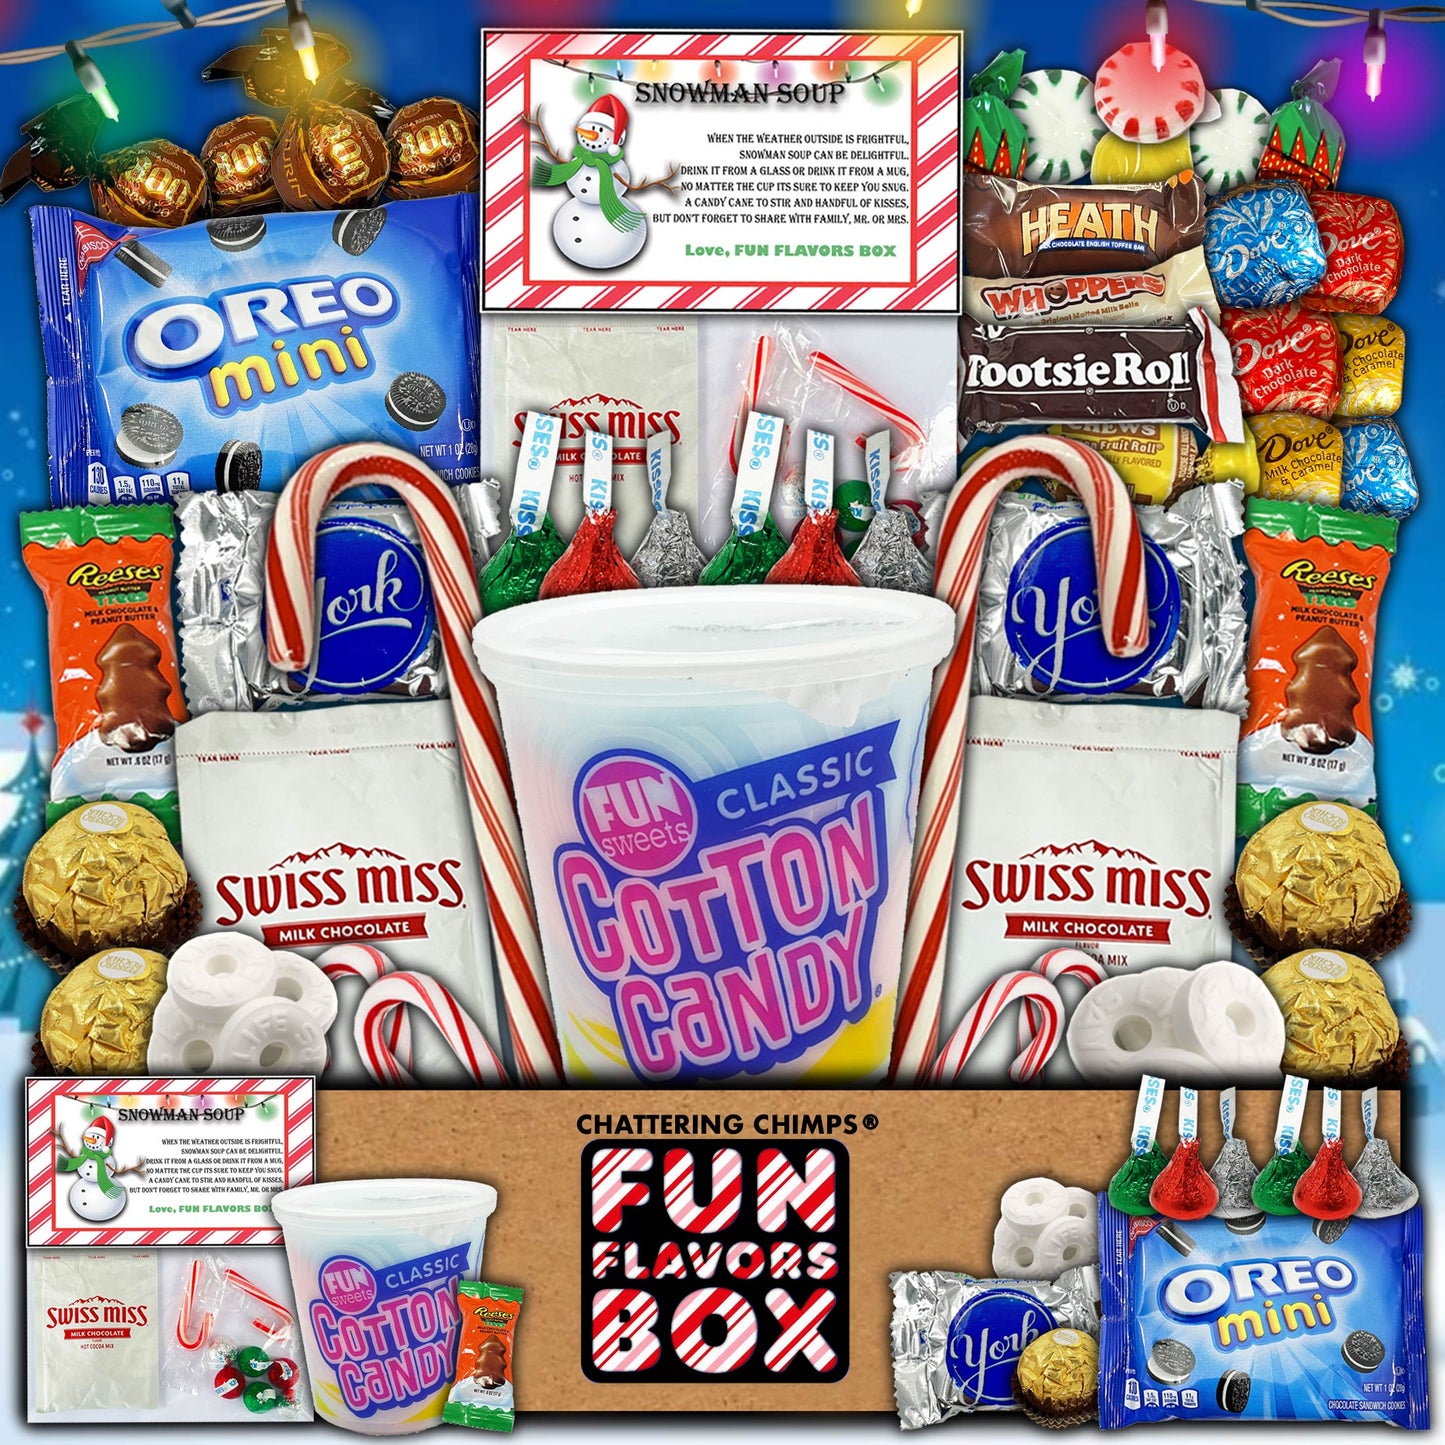 Copy of Christmas Gift Box Care Package 50 Count Variety Pack of Sweet Treats Snack Box Sampler